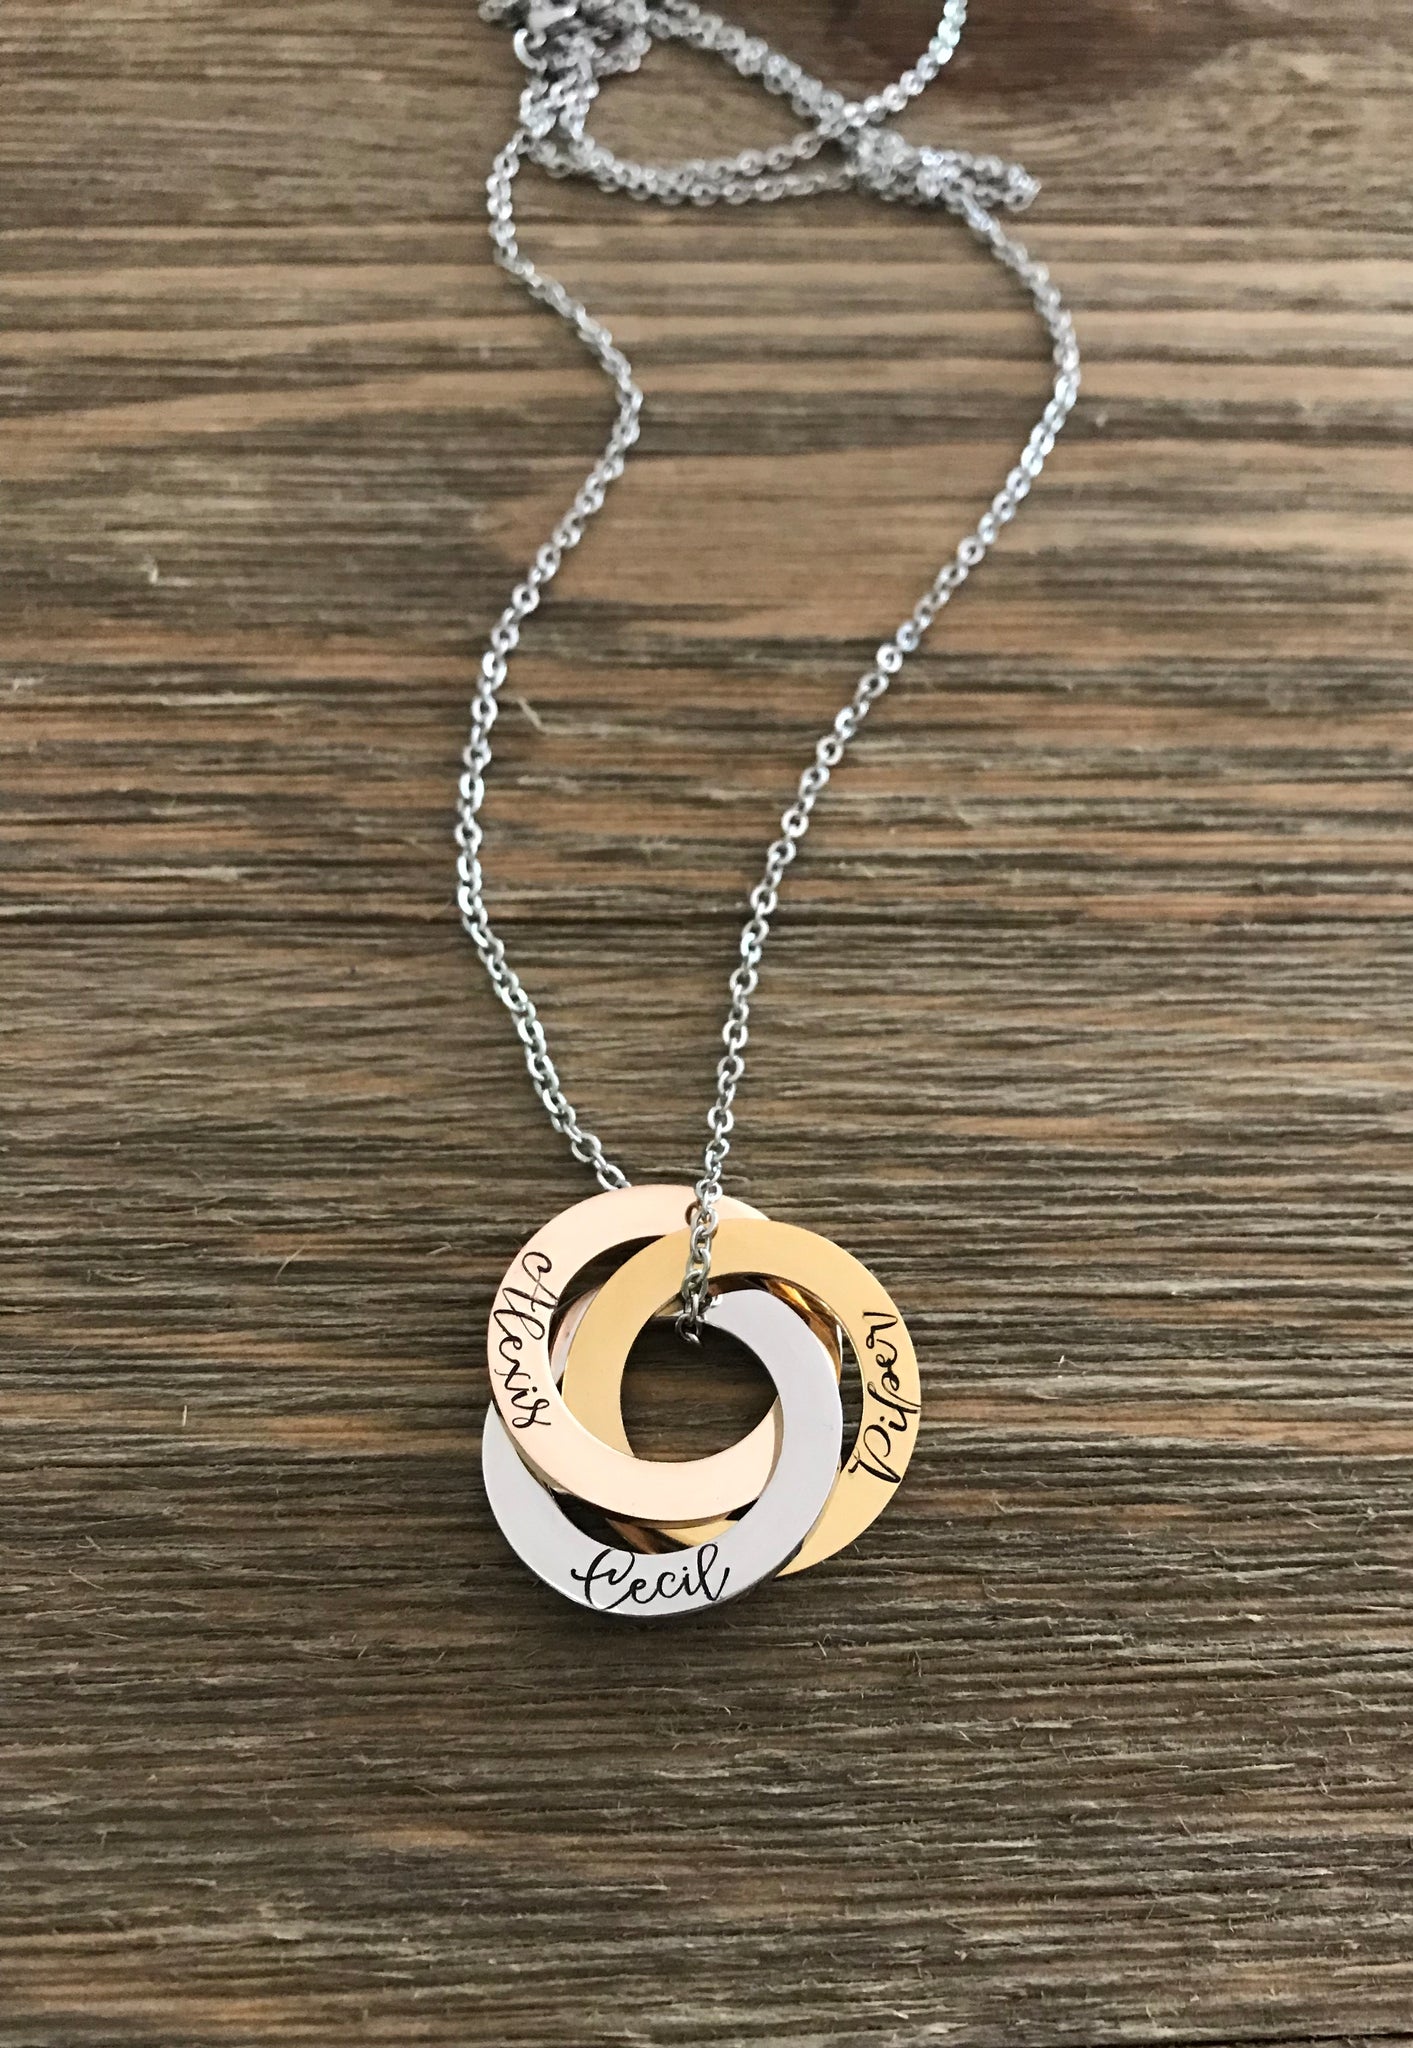 Personalised 9ct Gold Mini Russian Ring Necklace | Posh Totty Designs